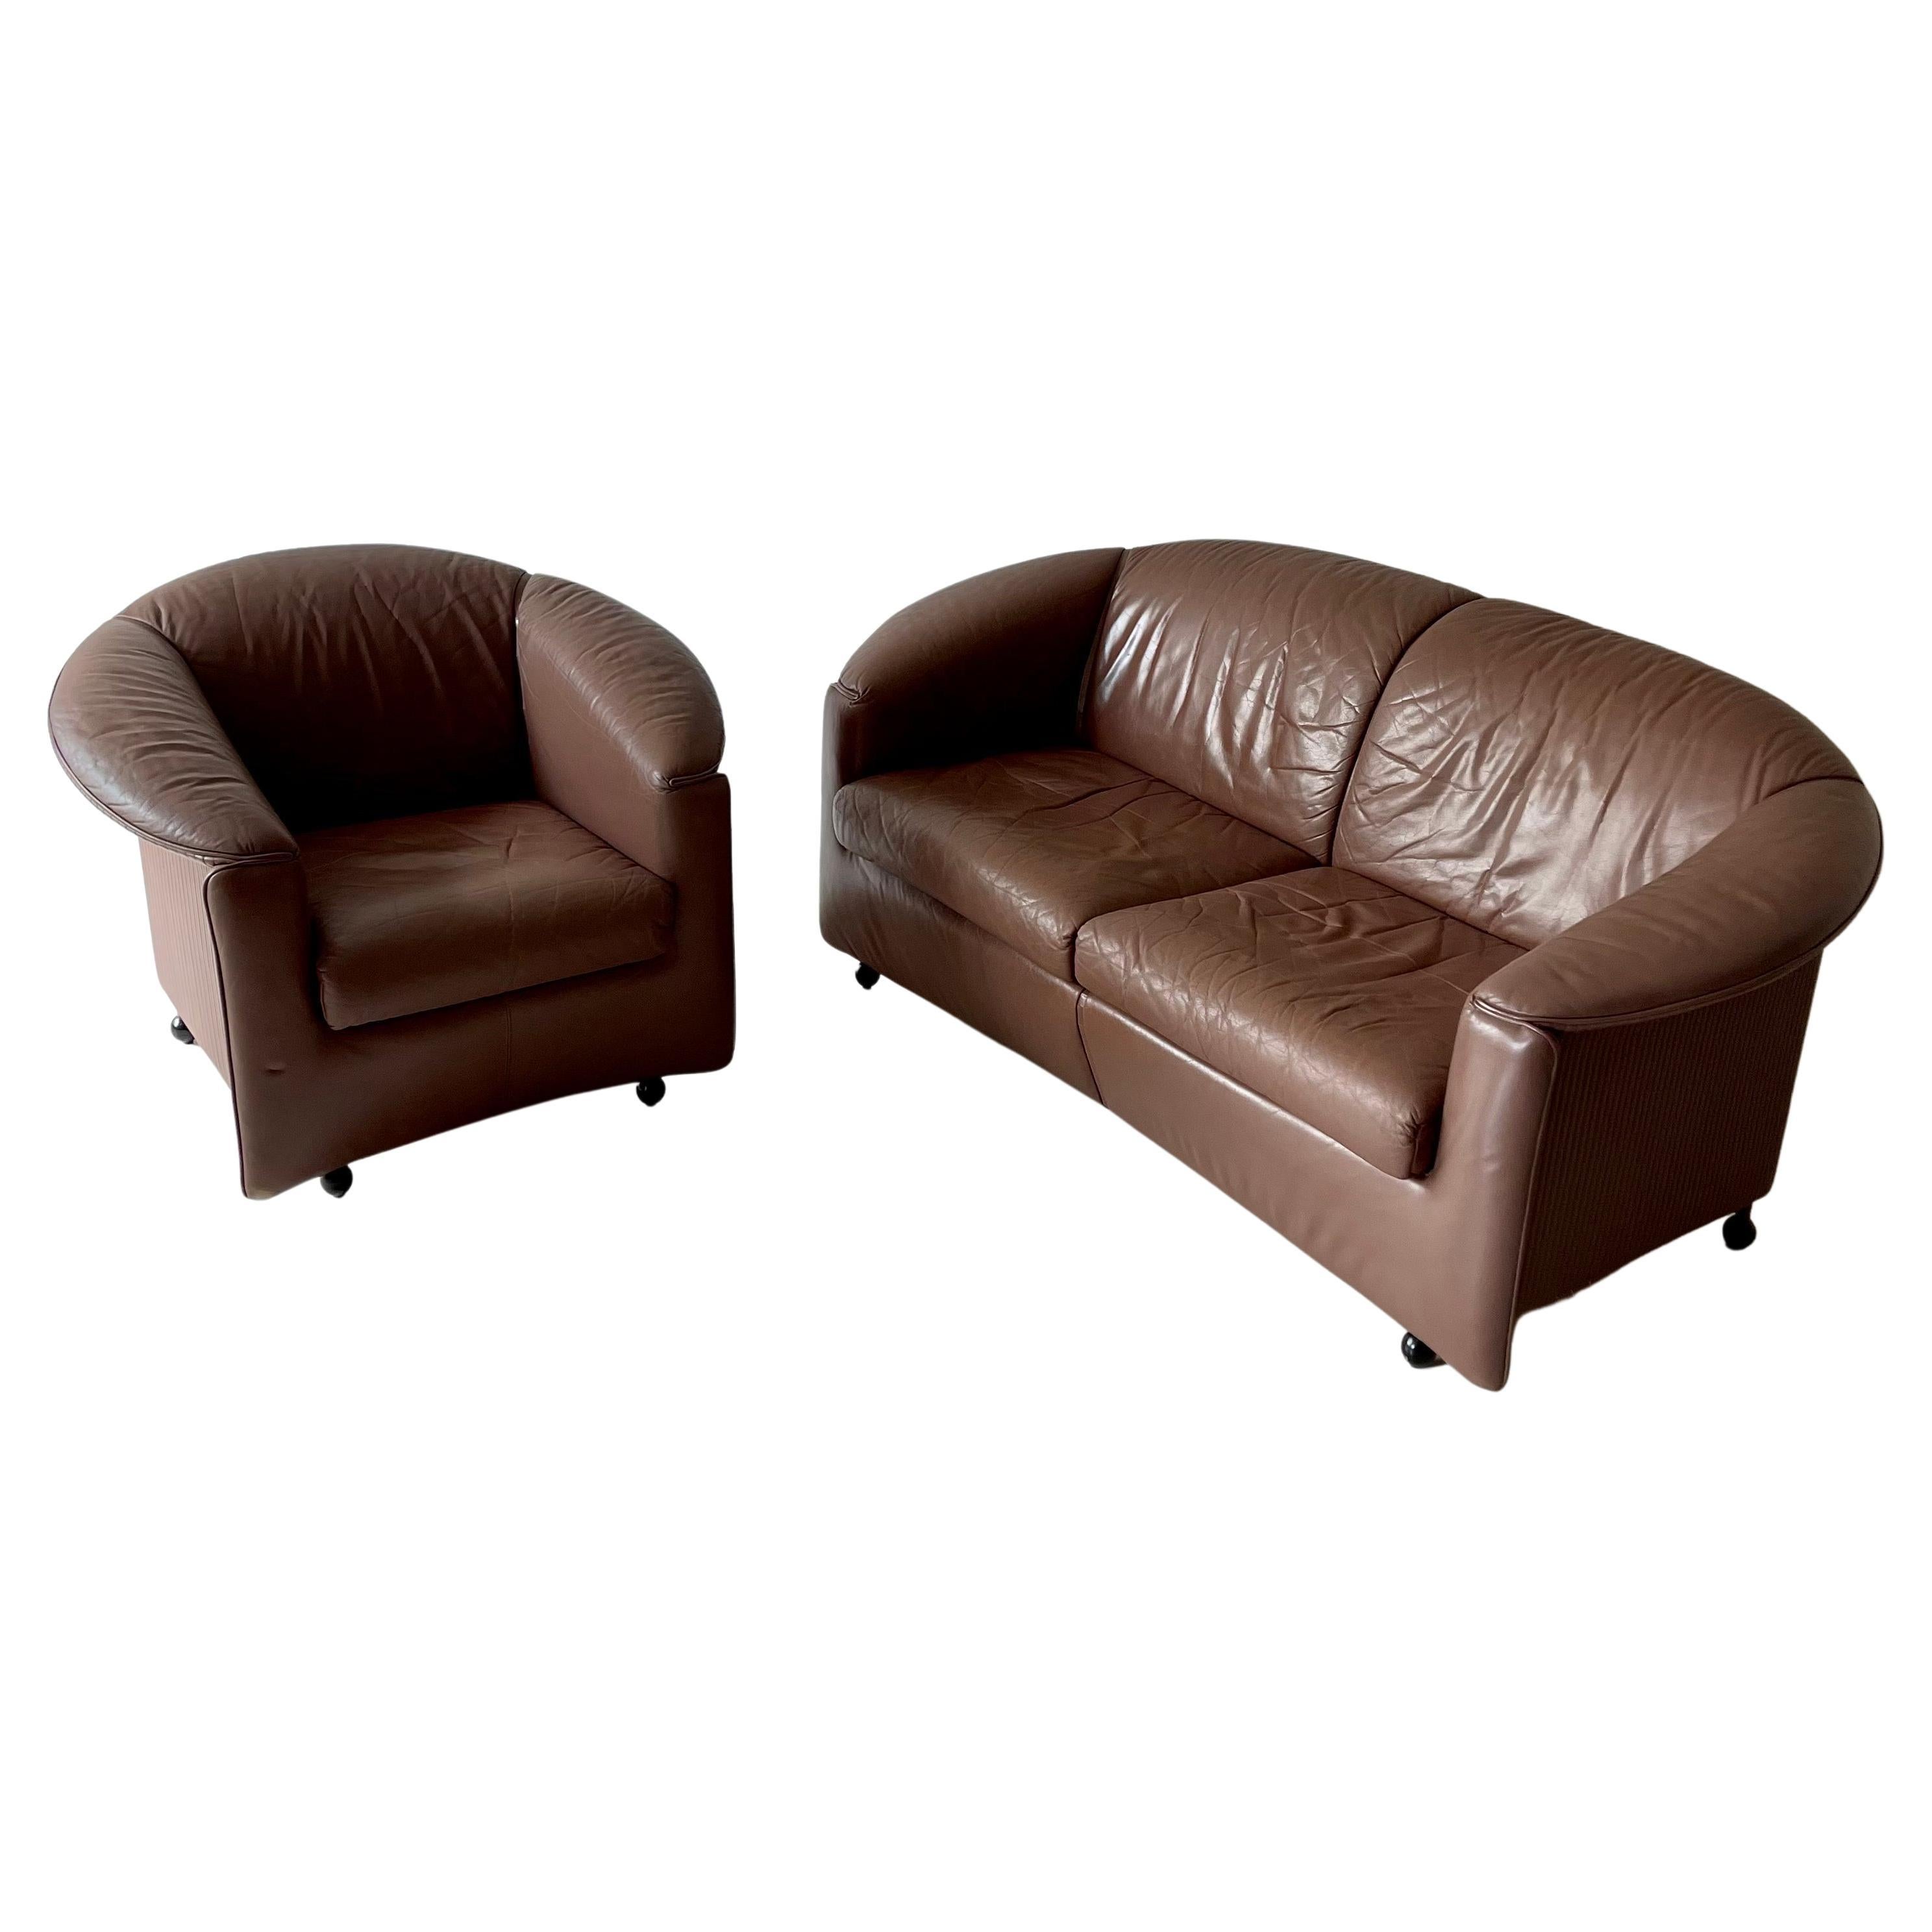 Wittmann Sofa Armchair, Set of Two For Sale